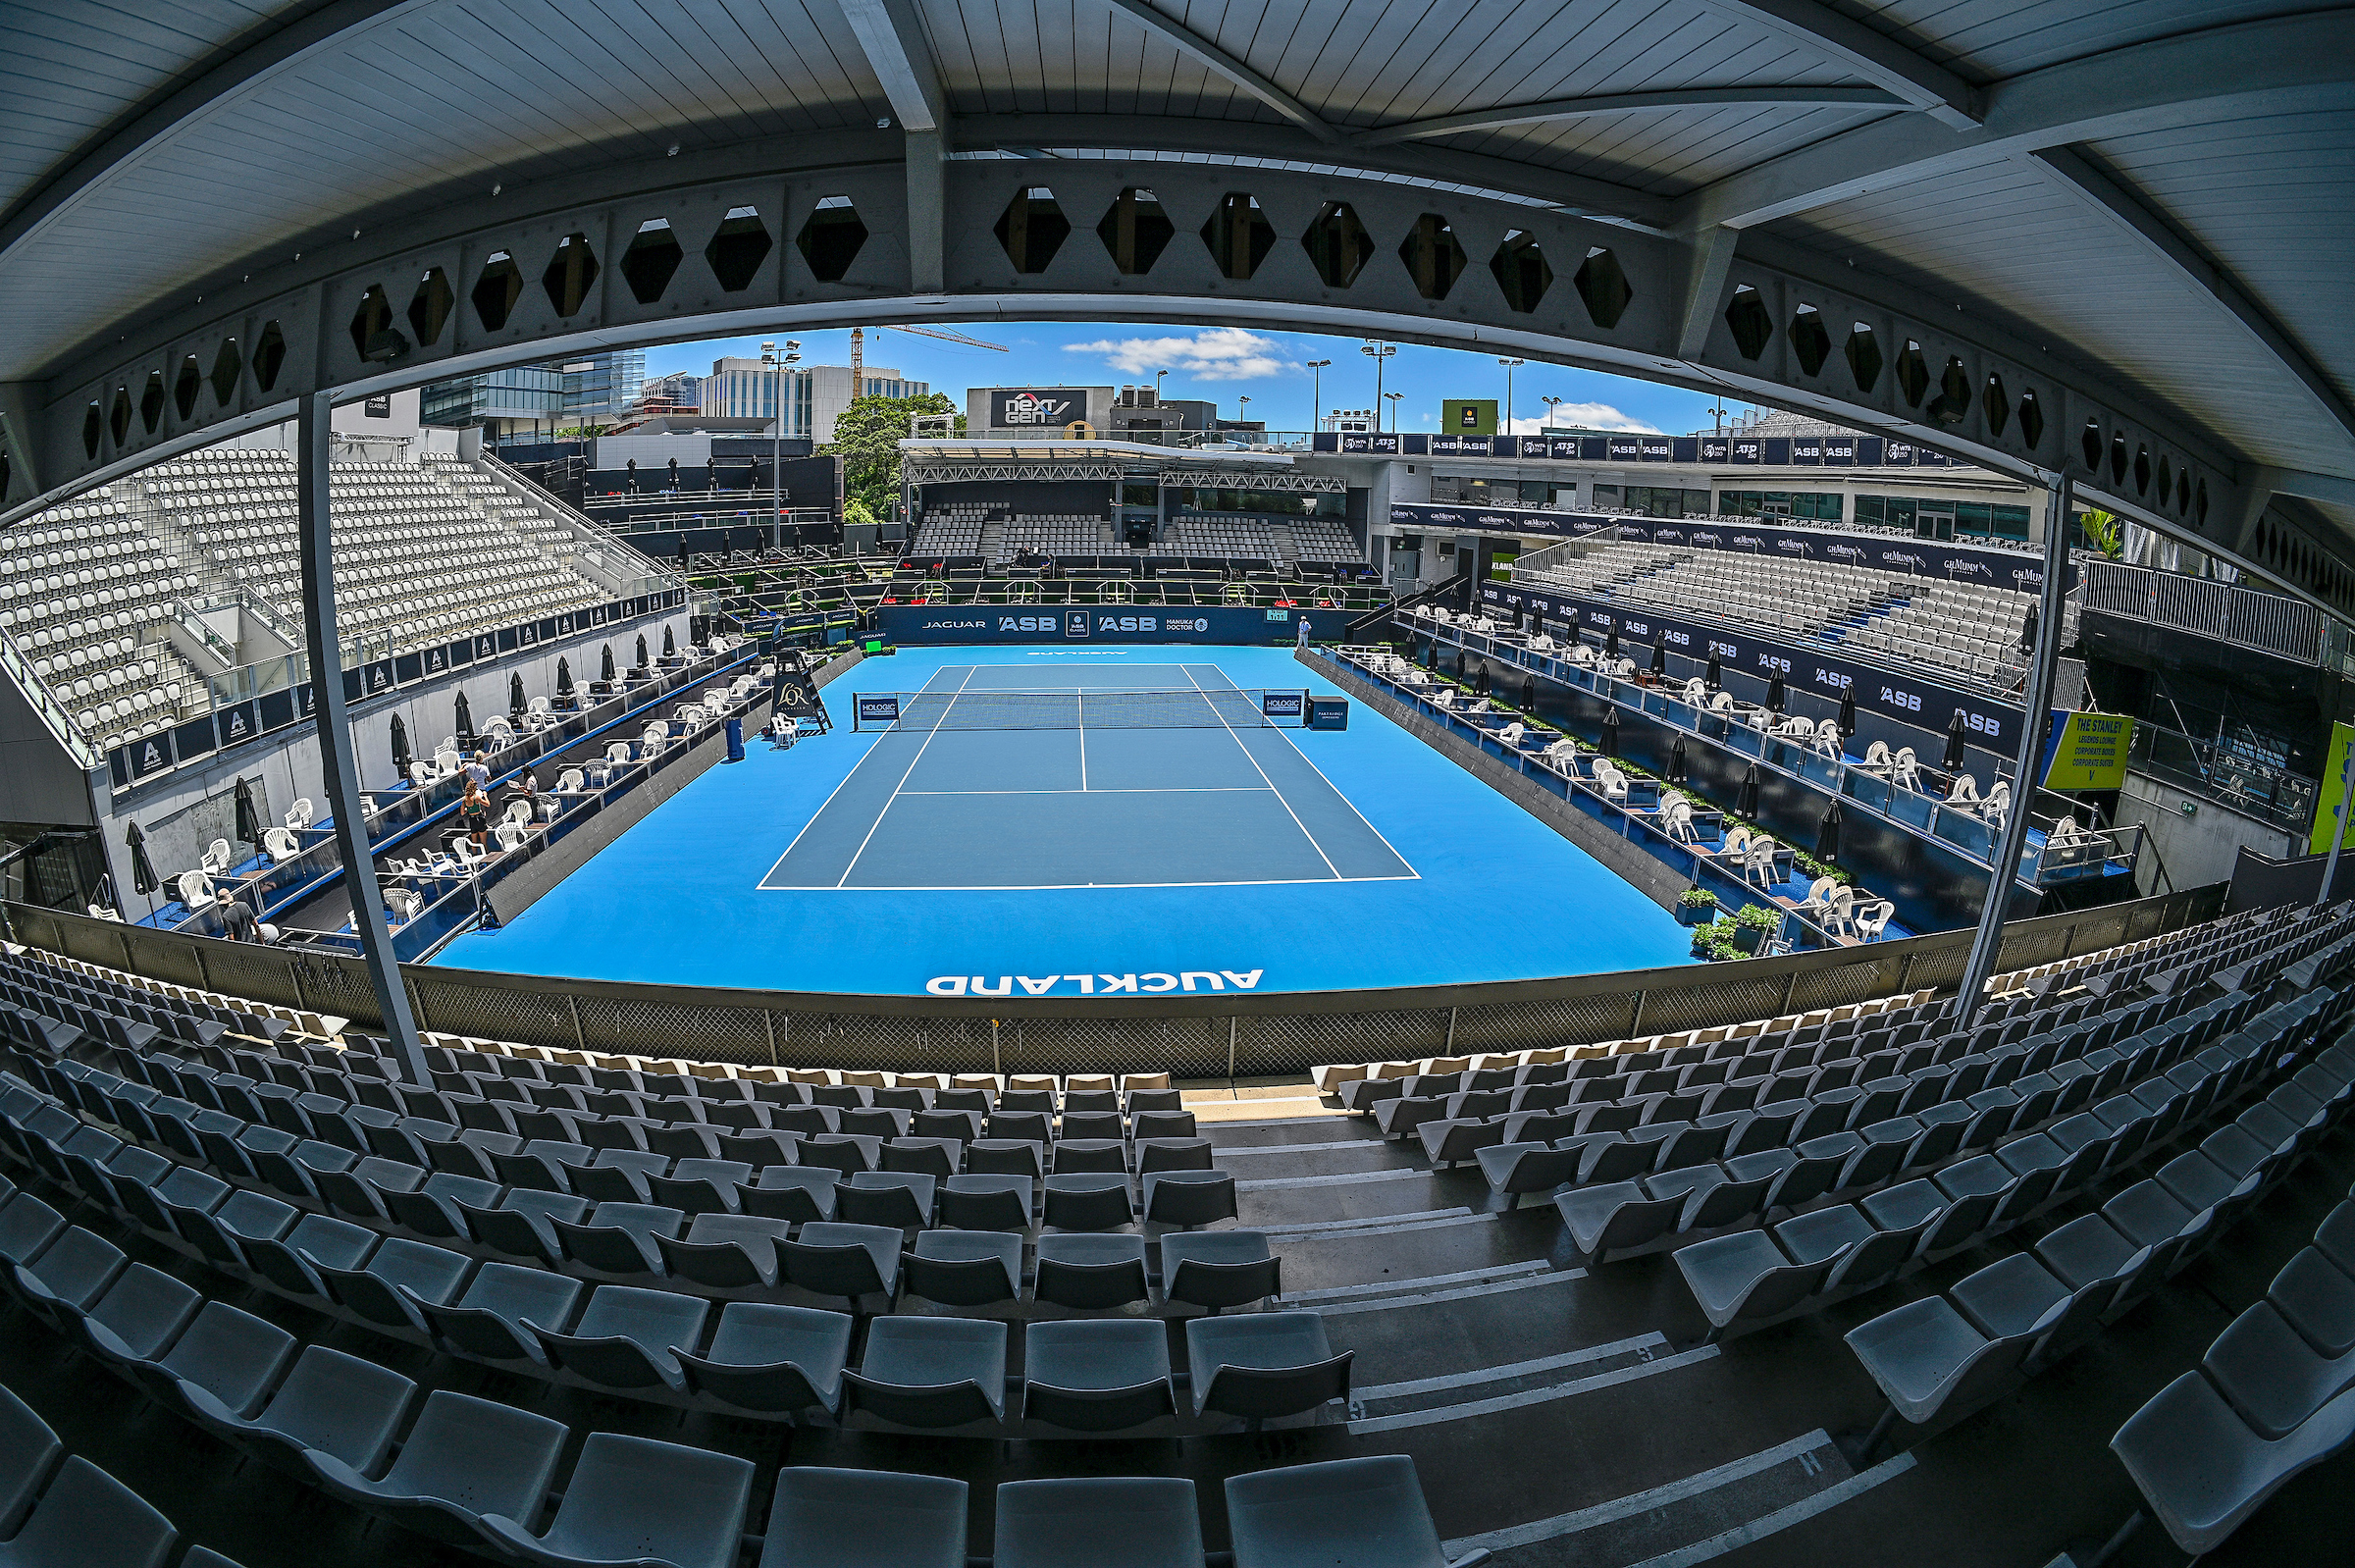 Tennis Meet the man tasked with getting the ASB Classic back to normal service